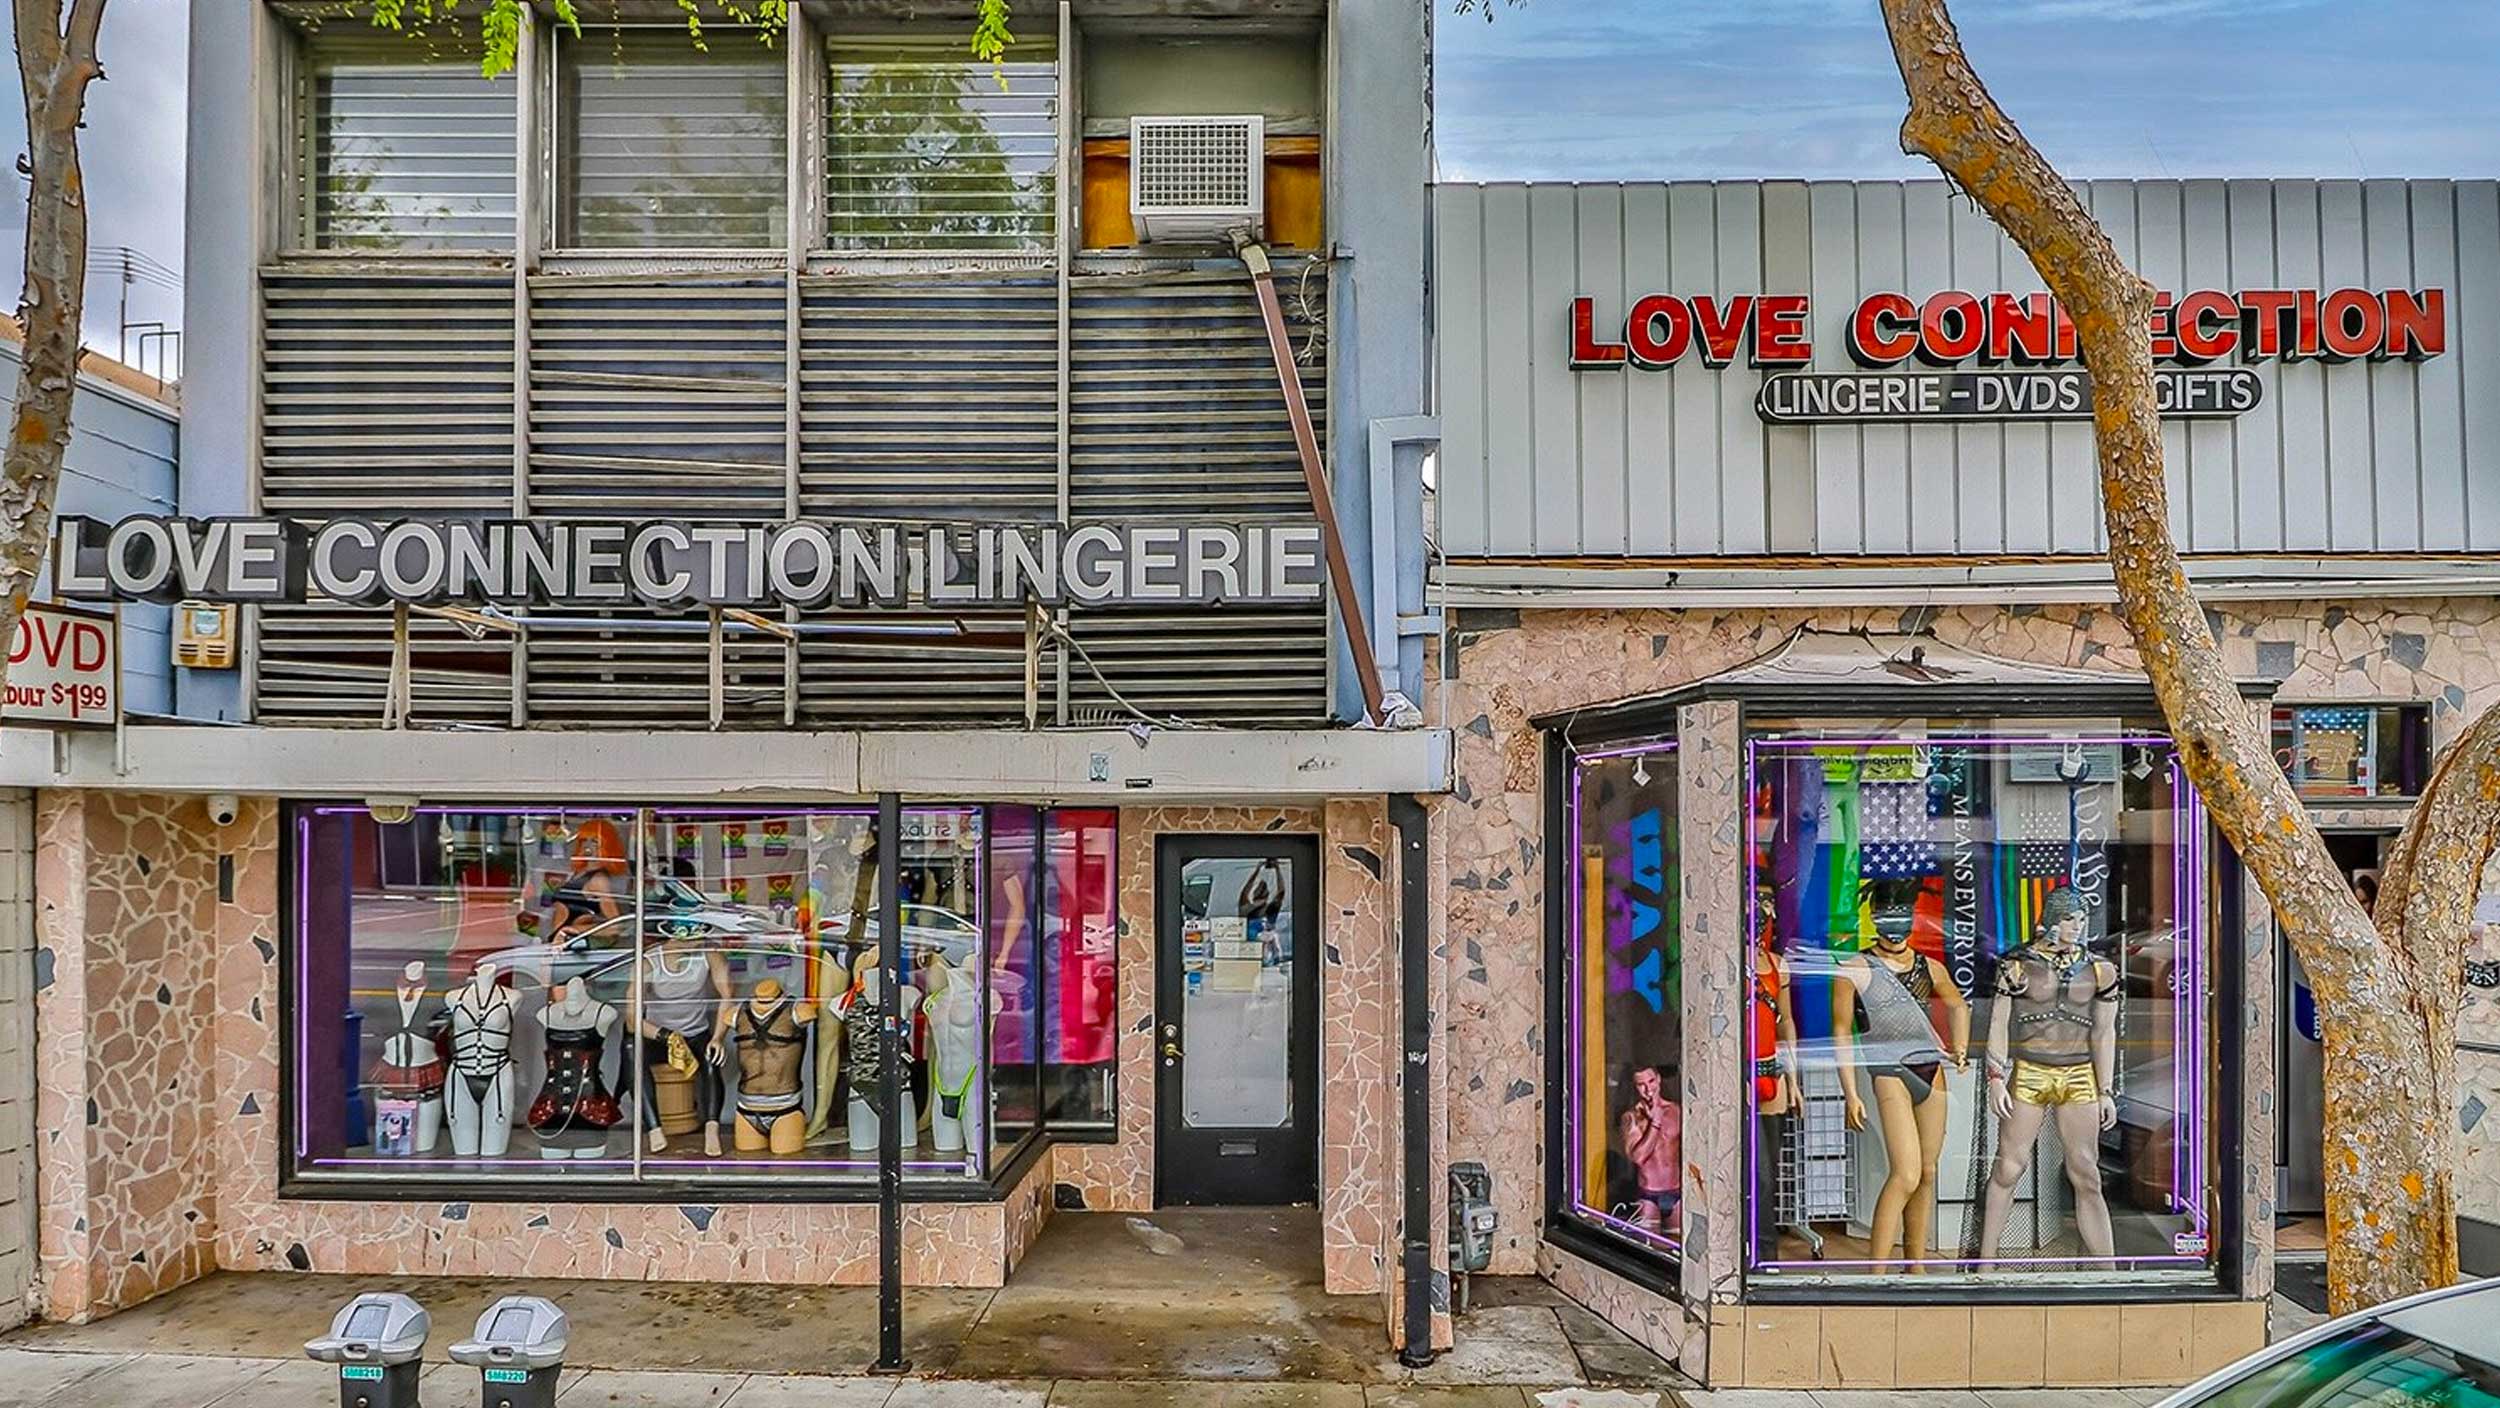 Street-level shot of a lingerie store with colorful displays in West Hollywood.